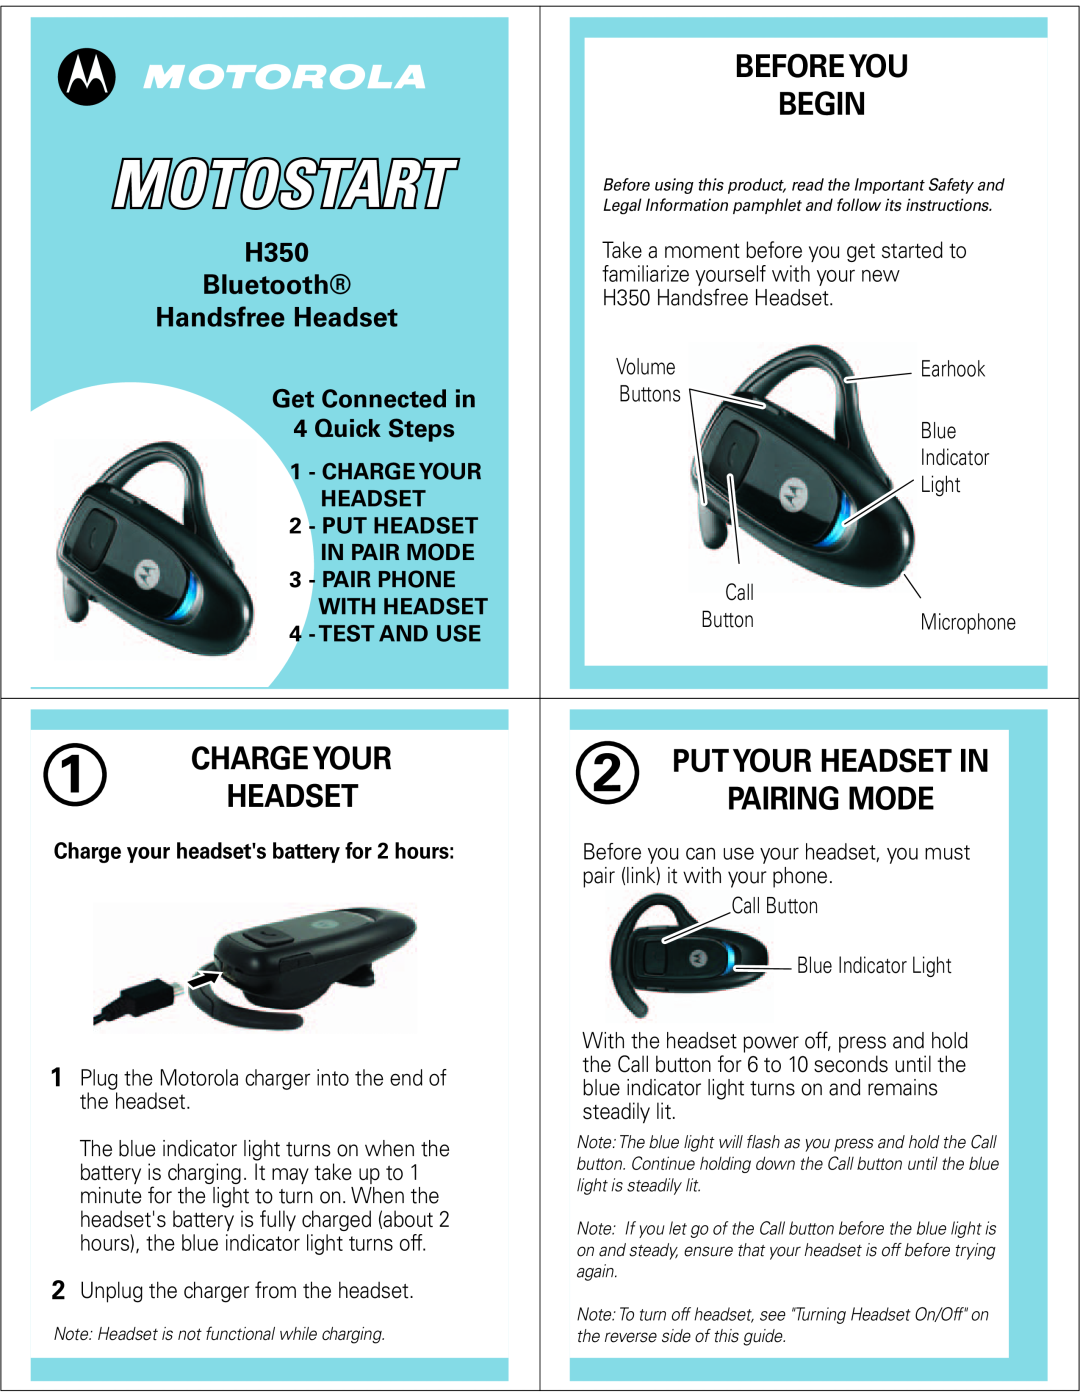 Motorola H350 manual Begin, Before You, Put Your Headset In, Pairing Mode, Bluetooth, Handsfree Headset, Charge Your 